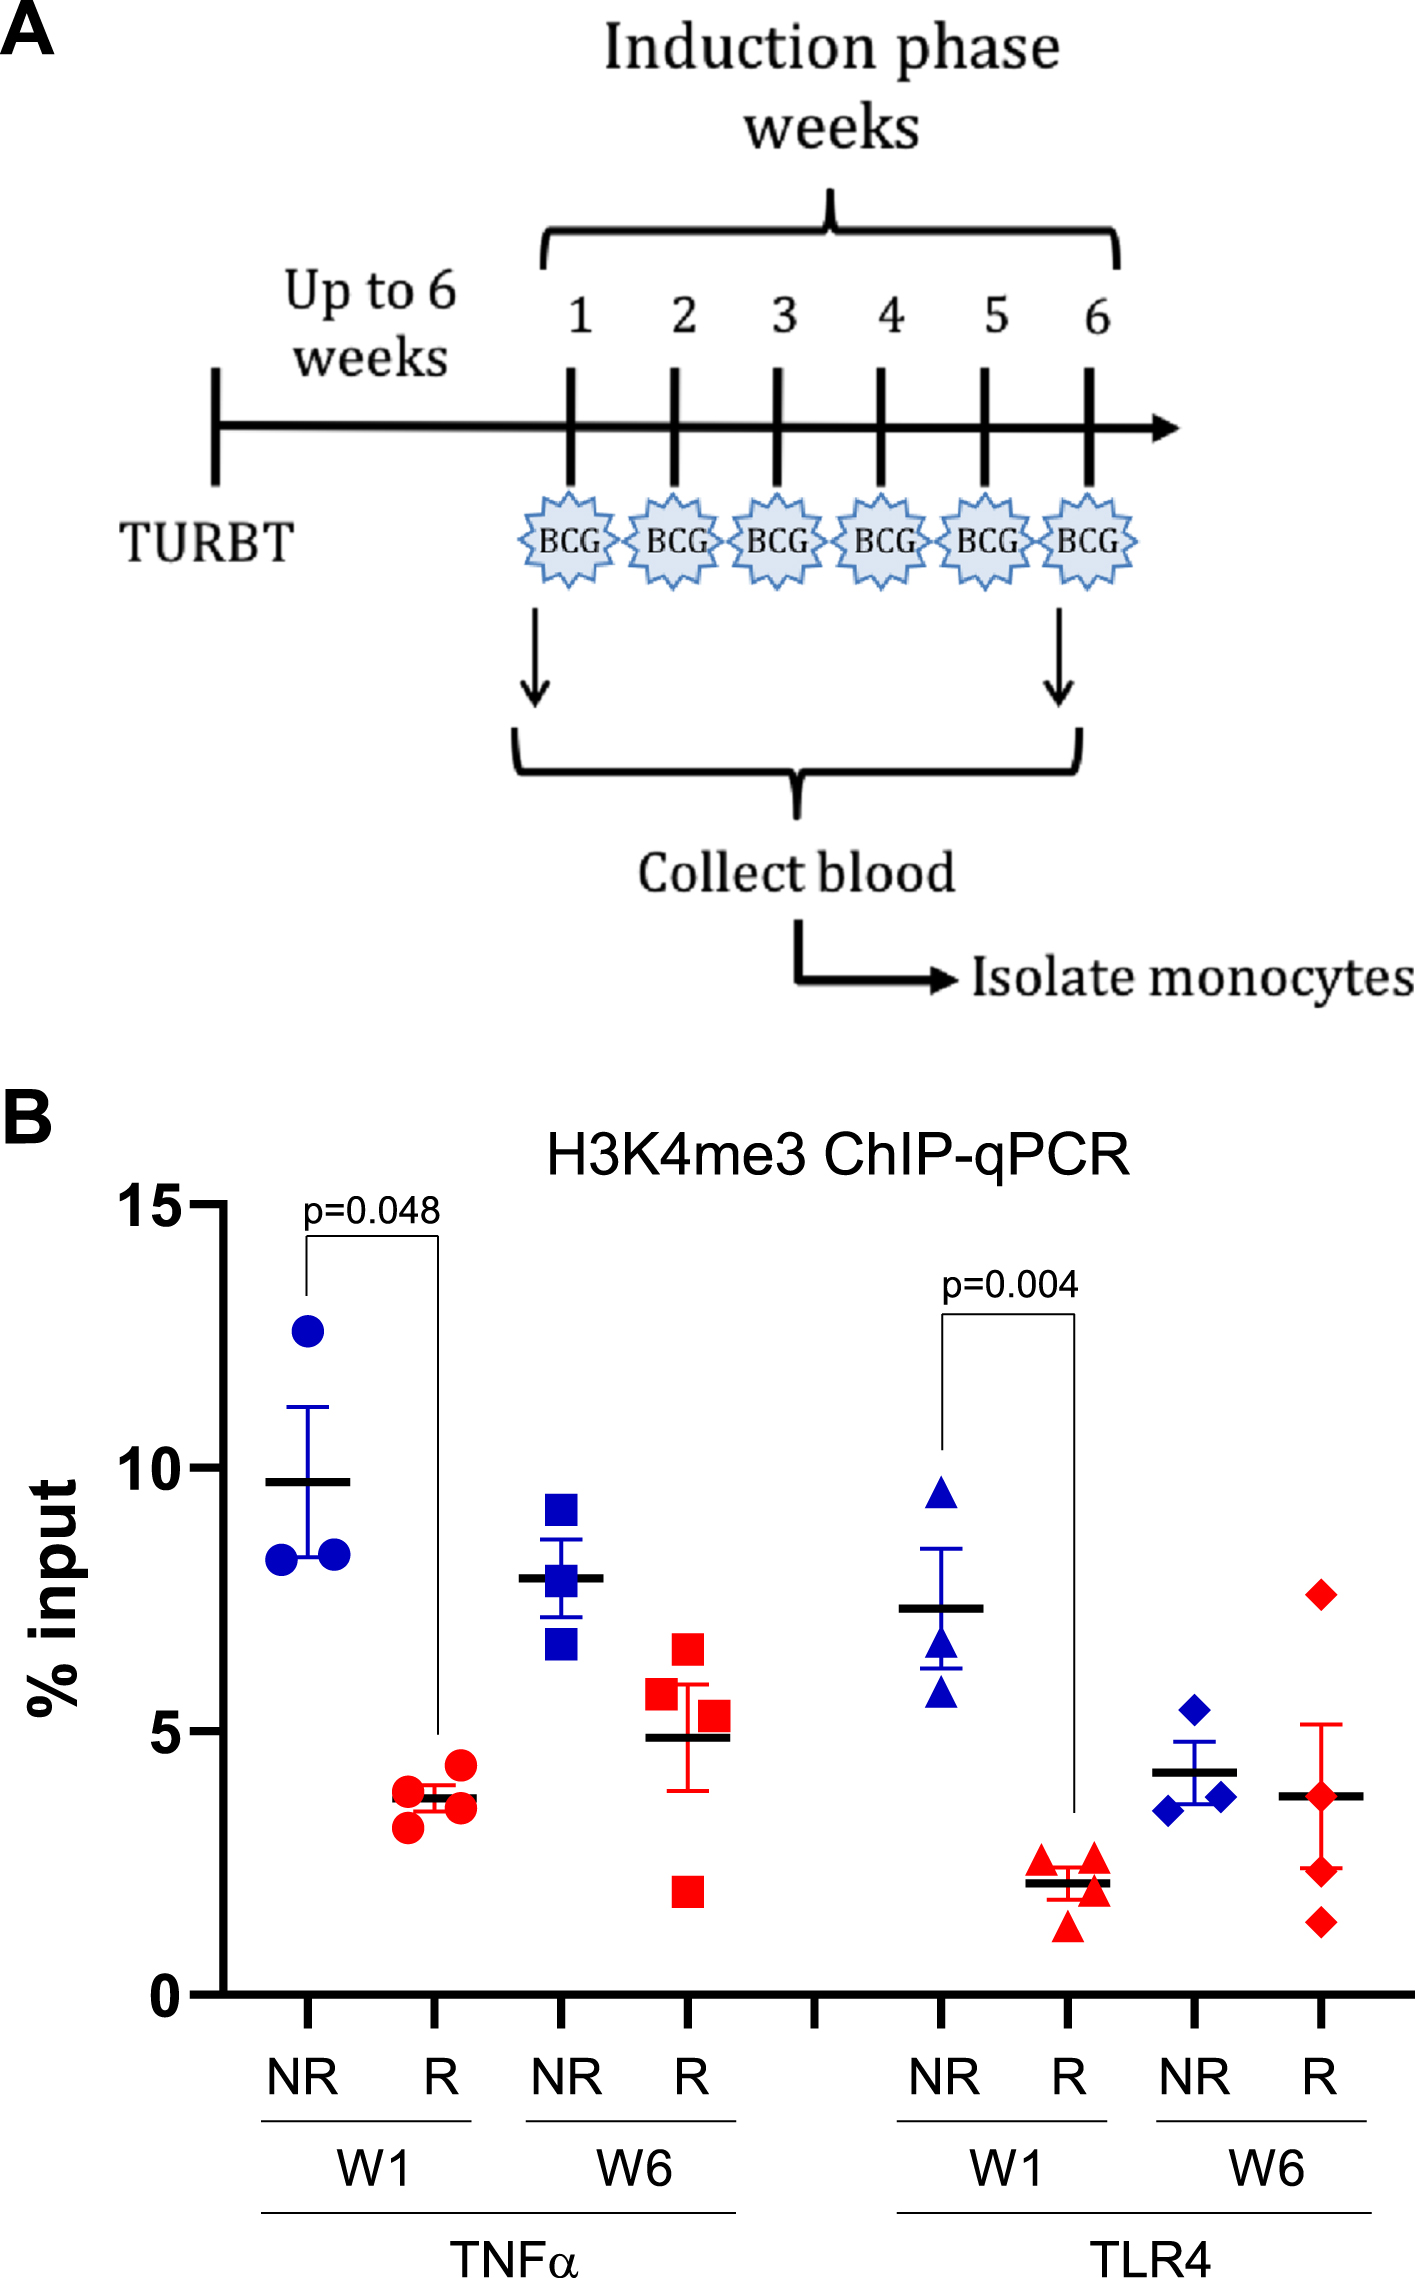 H3K4me3 methylation at promoters of innate immune memory-related genes. A) peripheral blood from patients with NMIBC was collected before the first (week 1) and last (week 6) intravesical BCG instillation of the first induction phase. TURBT: transurethral resection of bladder tumor; BCG: bacillus Calmette-Guérin. B) H3K4me3 in monocytes at promoters of TNFα and TLR4 genes before the first BCG instillation (week 1) and the last (week 6). Blue solid shapes: no-early recurrence (NR) patients used for ChIP-seq; red solid shapes: early recurrence (R) patients used for ChIP-seq; circles: week 1 (pre-BCG); squares: week 6 (before 6th BCG instillation).